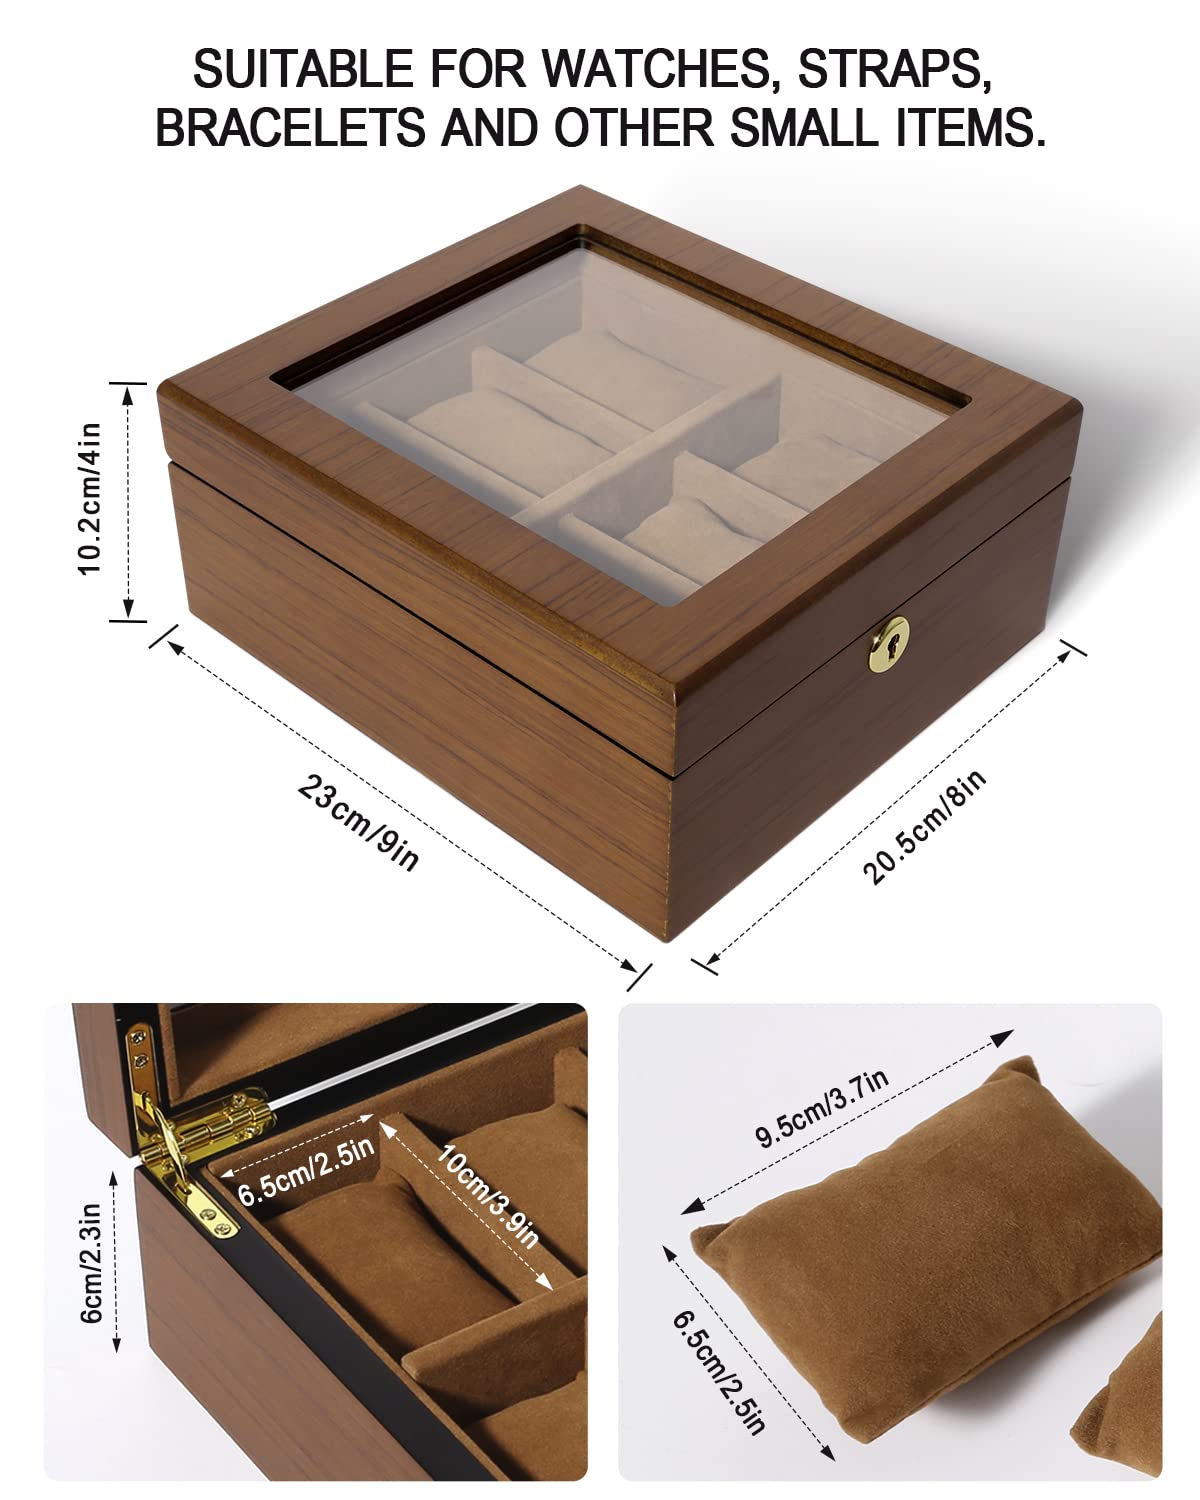 Uten Watch Box with 6 Slots, Watch Case Organizer with Golden Lock and Key, Wooden Watch Display Storage Box with Removable Watch Cushions, Velvet Lining, Metal Clasp, Gift for Men & Women